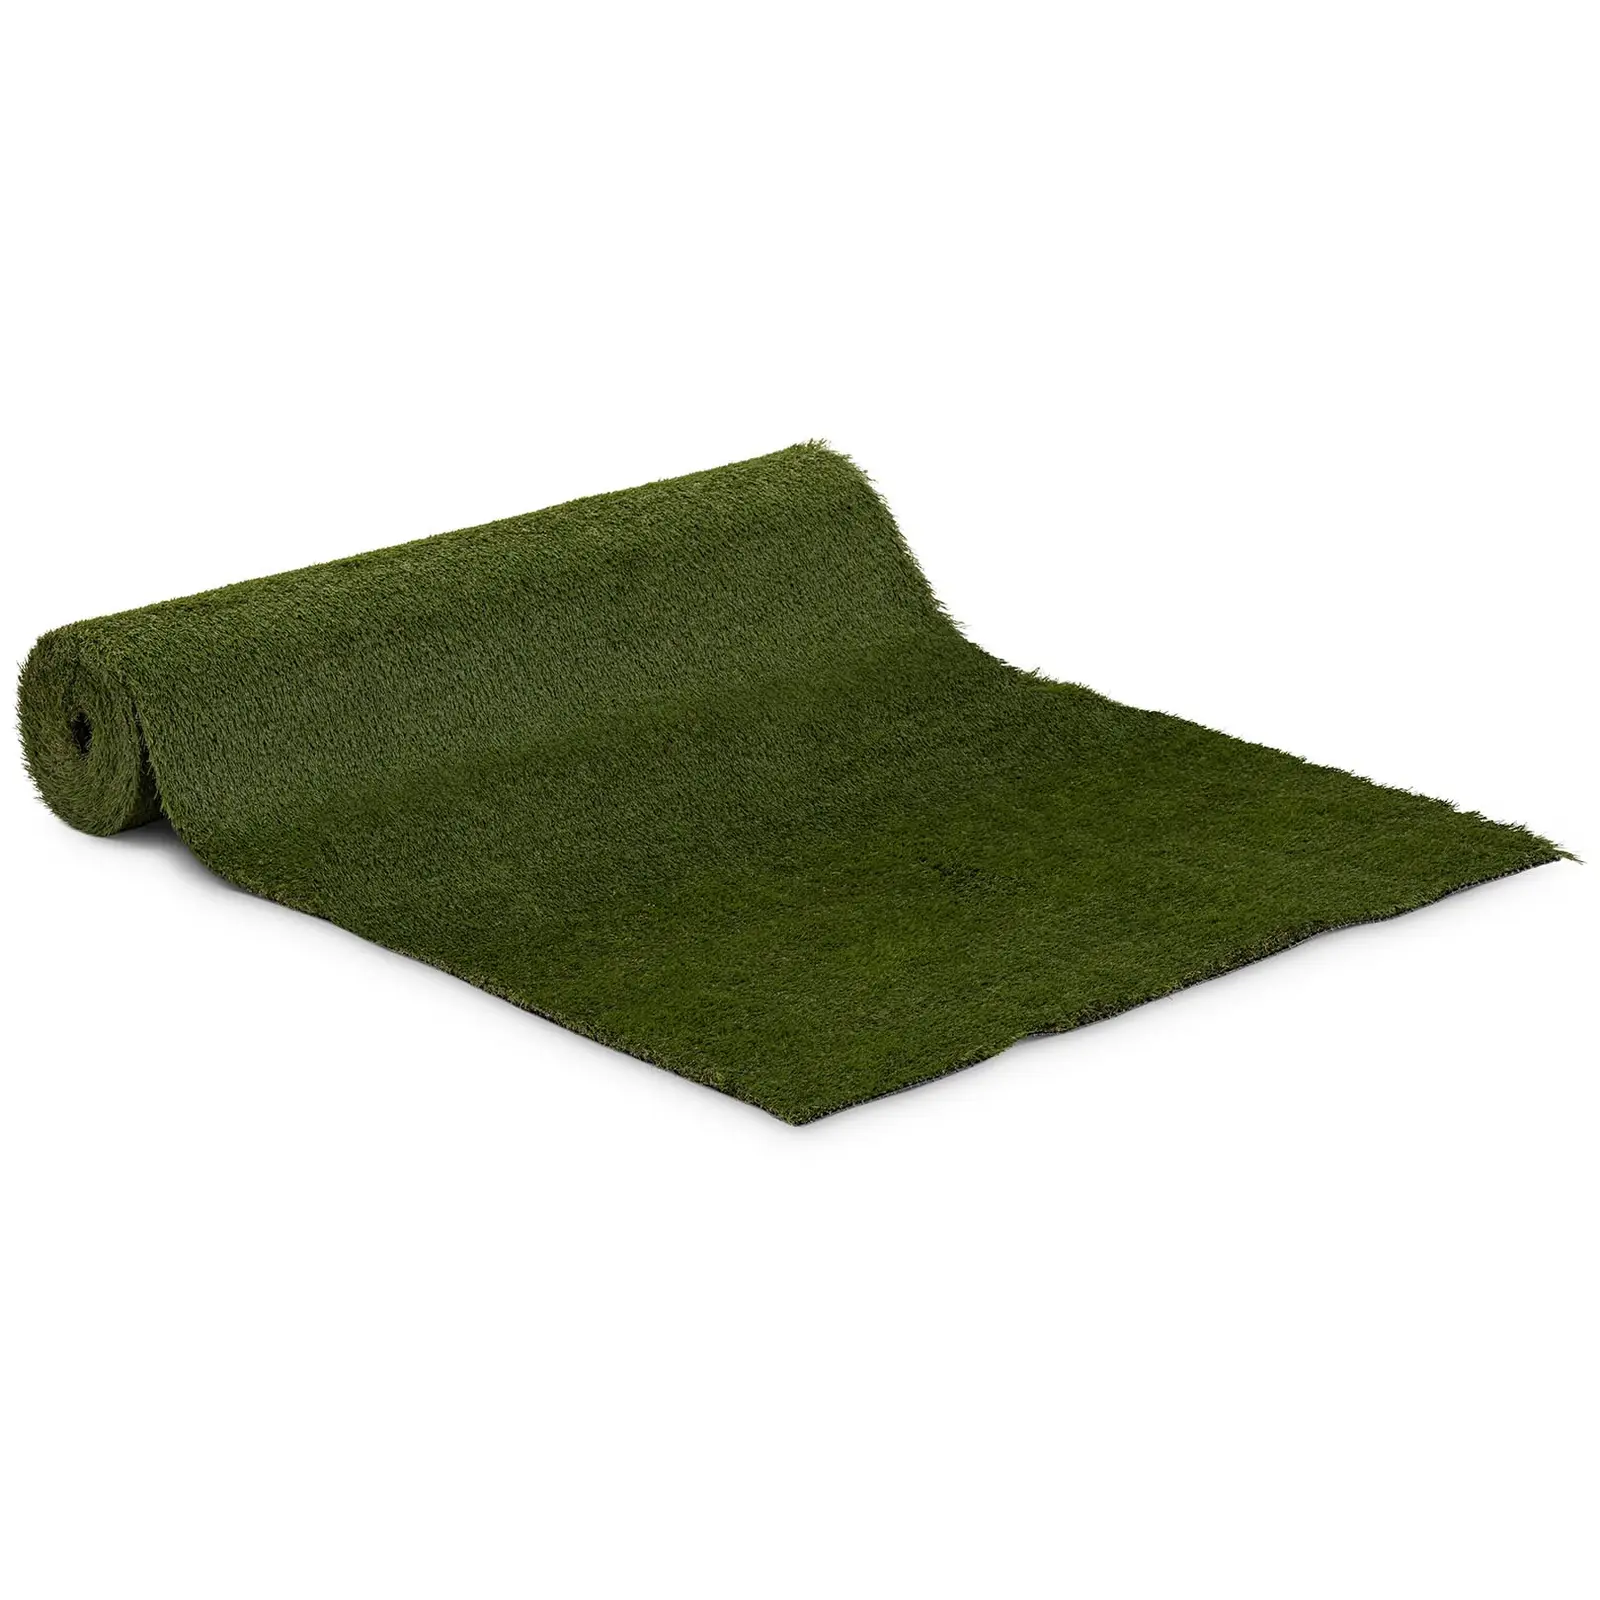 Artificial grass - 100 x 500 cm - Height: 30 mm - Stitch rate: 20/10 cm - UV-resistant